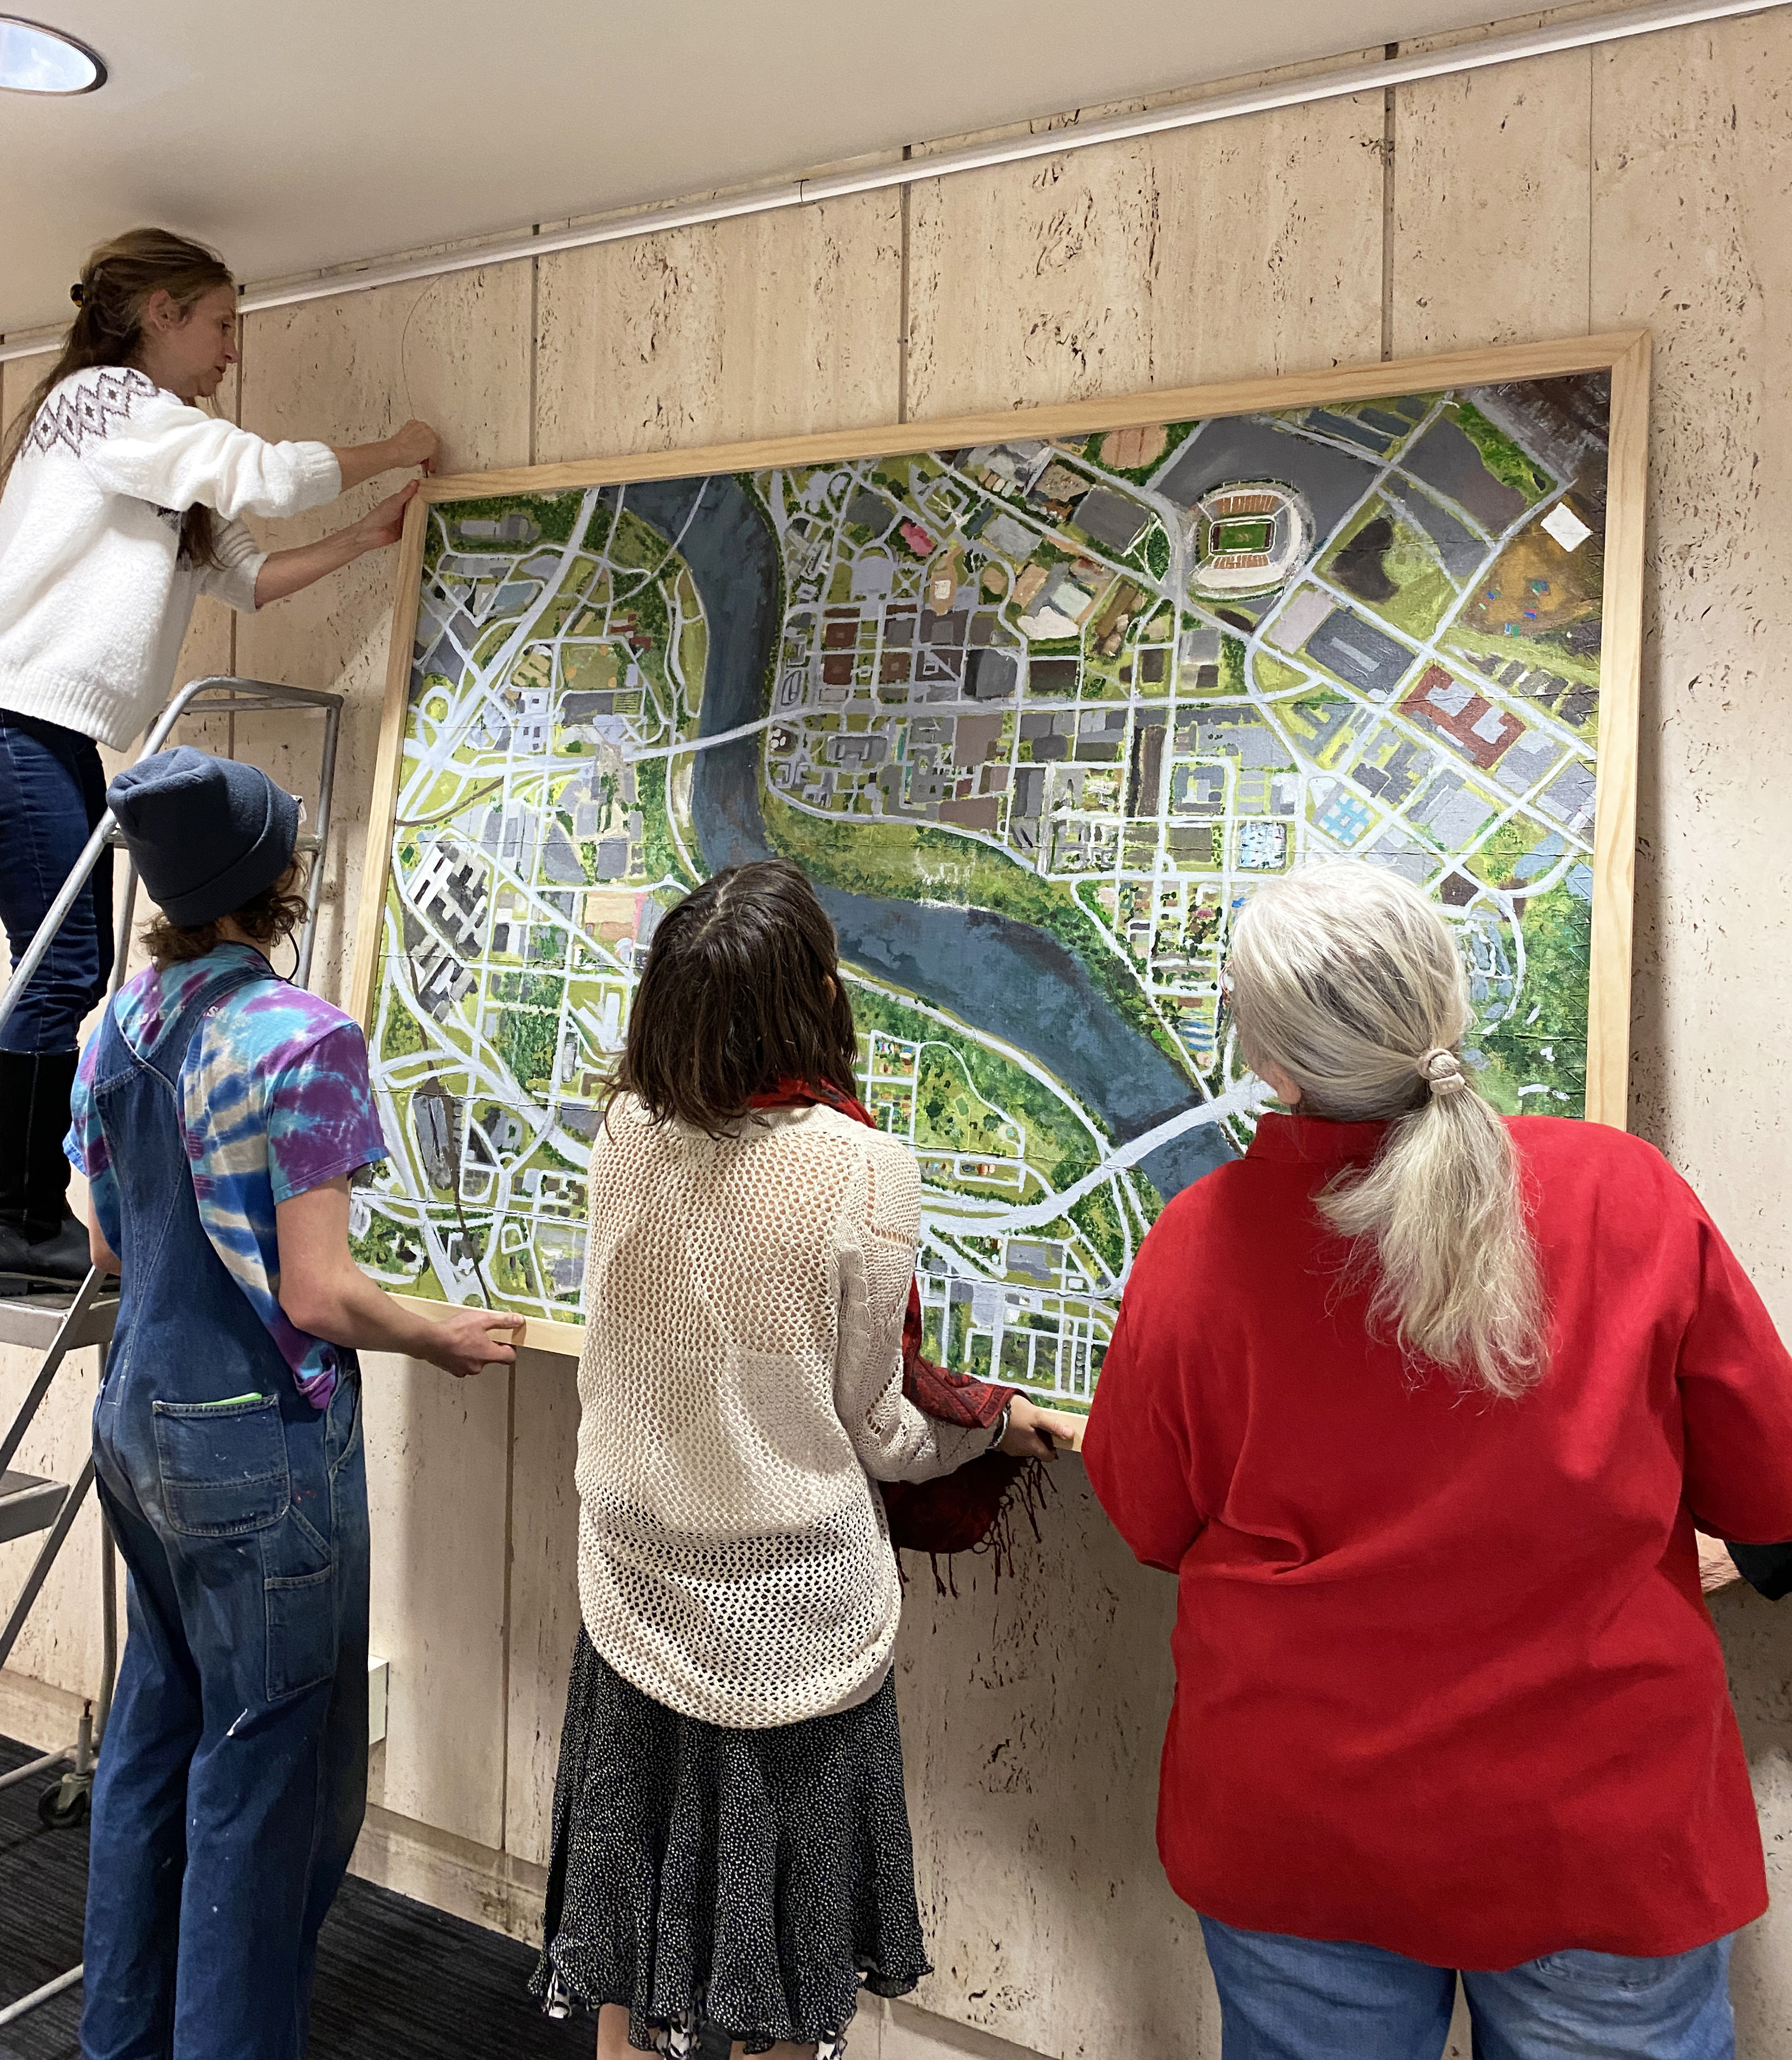 Three people hold a large framed map while another on a step-ladder attaches it to hangers